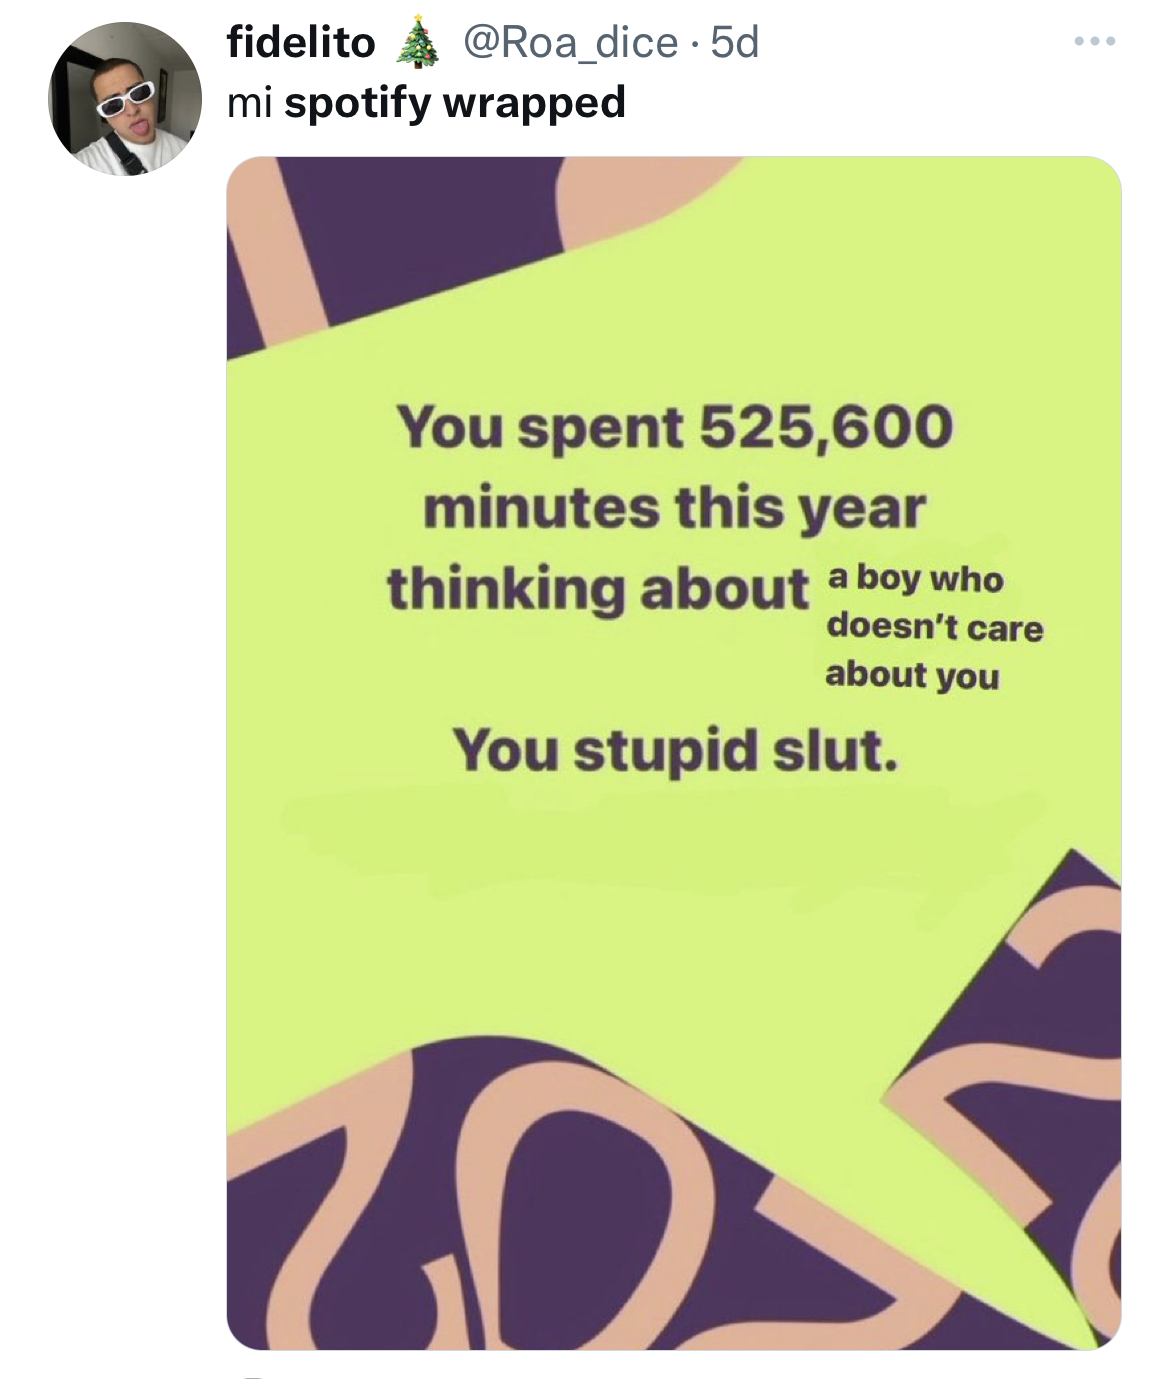 Spotify Wrapped Memes - fidelito mi spotify wrapped You spent 525,600 minutes this year thinking about a boy who doesn't care about you 2 You stupid slut.